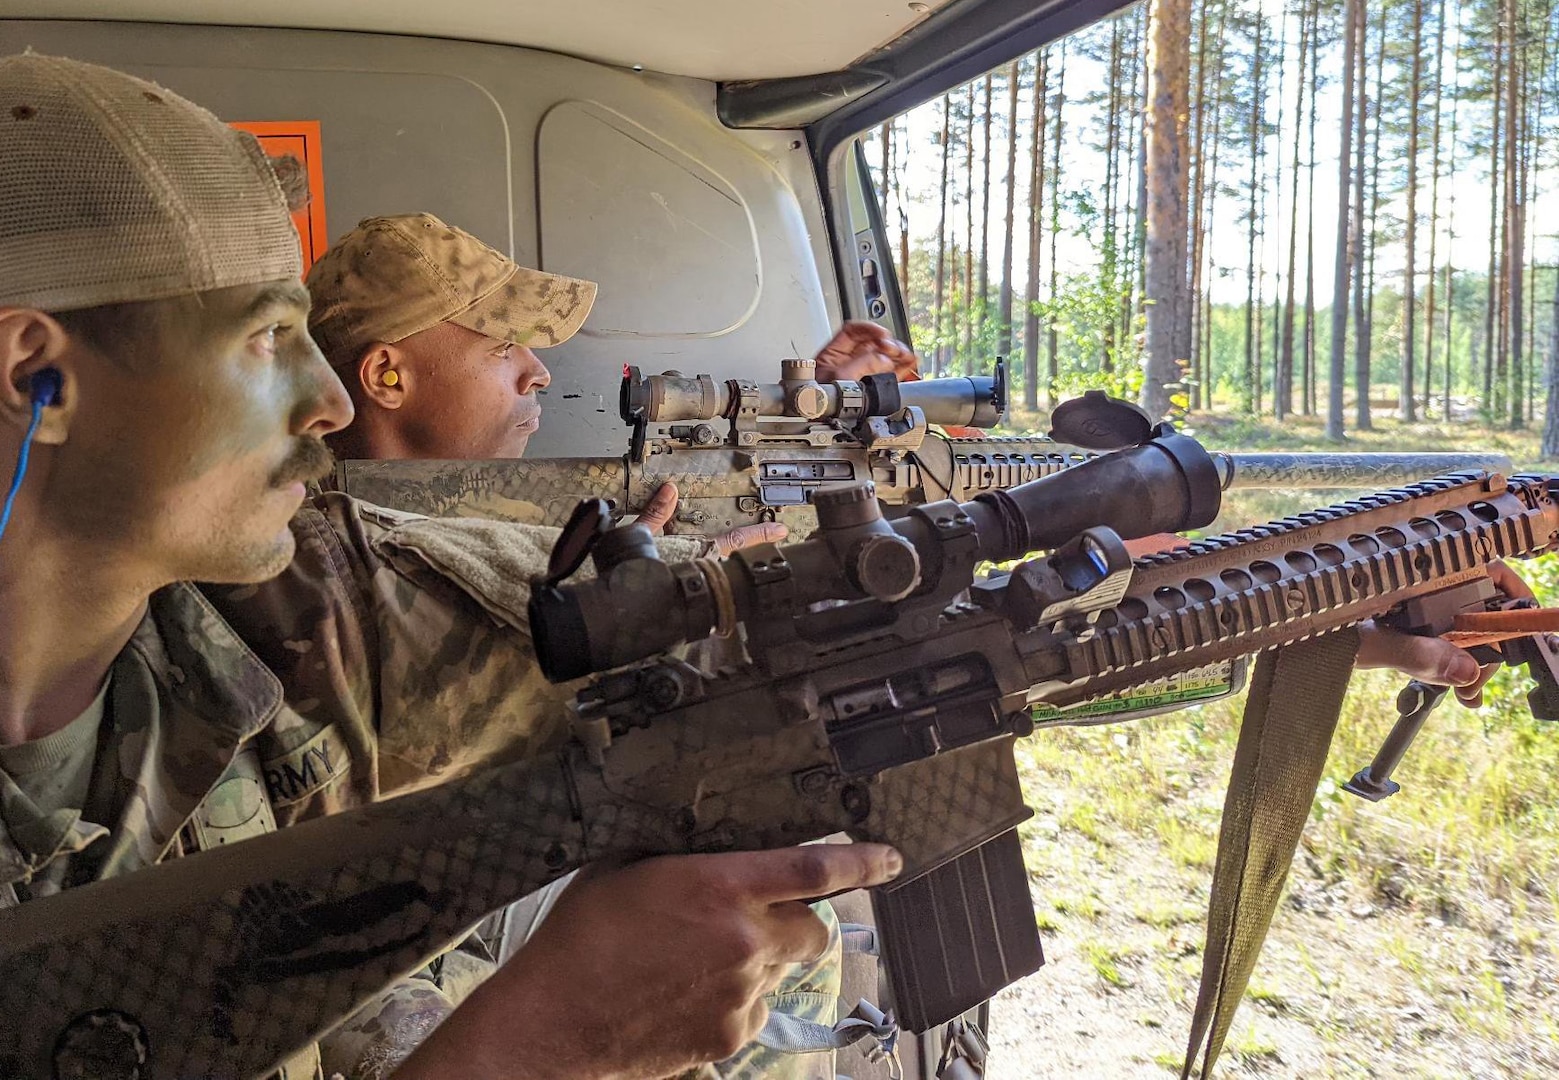 Three Virginia National Guard Soldiers assigned to the 1st Battalion, 116th Infantry Regiment, 116th Infantry Brigade Combat Team, competed in HÄYHÄ 2023, a Finnish Sniper Championship, Aug. 25-27, 2023, near Taipalsaari, Finland. Staff Sgt. Matthew Dawson, Staff Sgt. Joshua Johnson and Sgt. Gavin Asbury made up one of 26 teams in the competition.